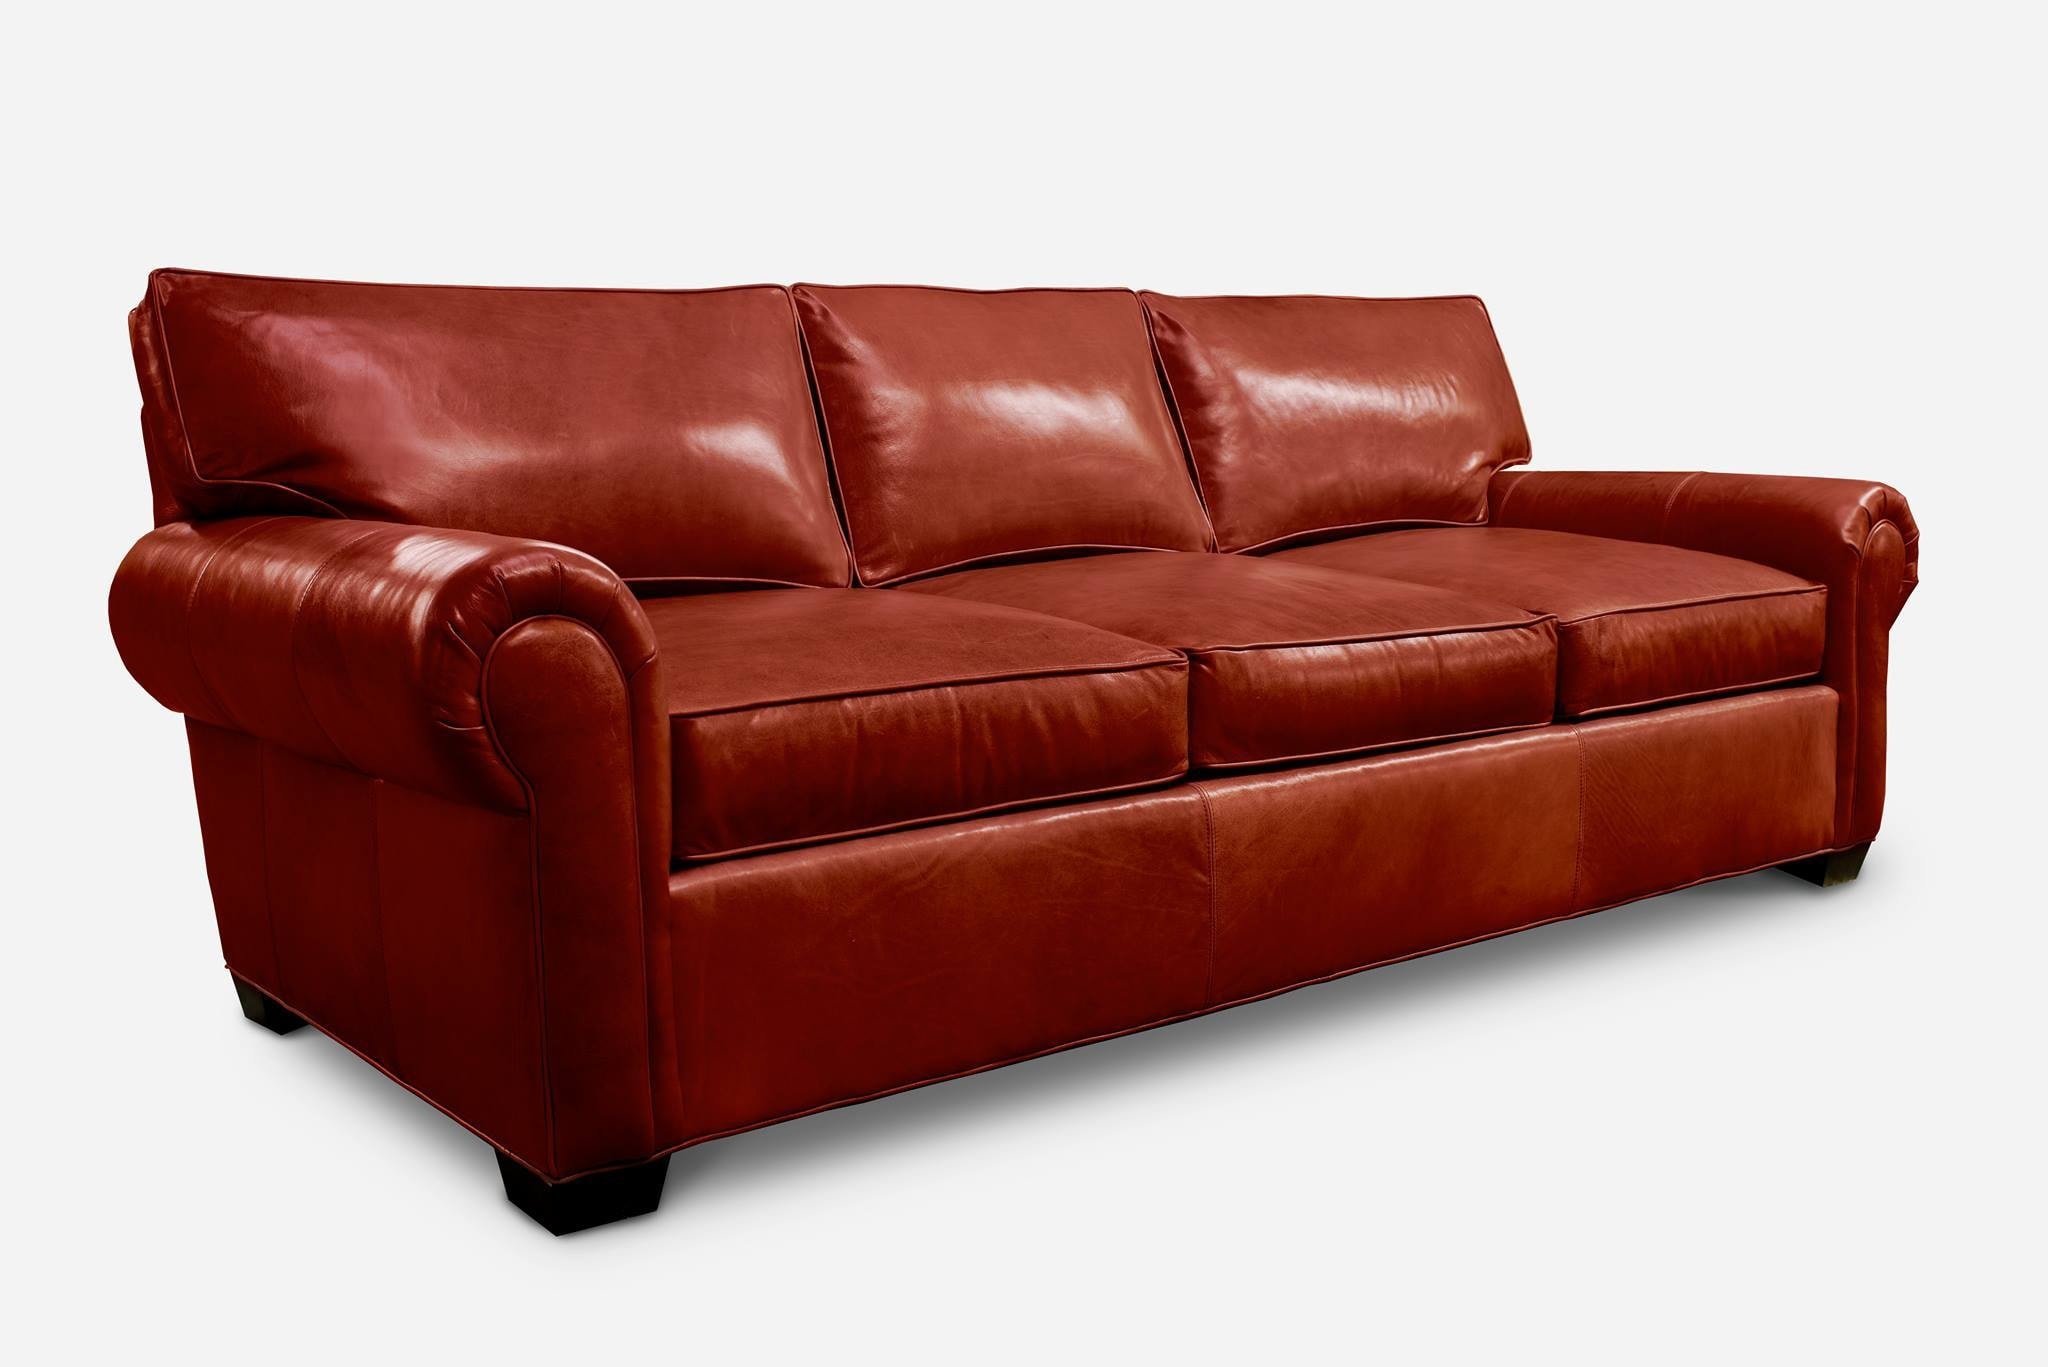 The Roosevelt Classic Roll Arm Sofas